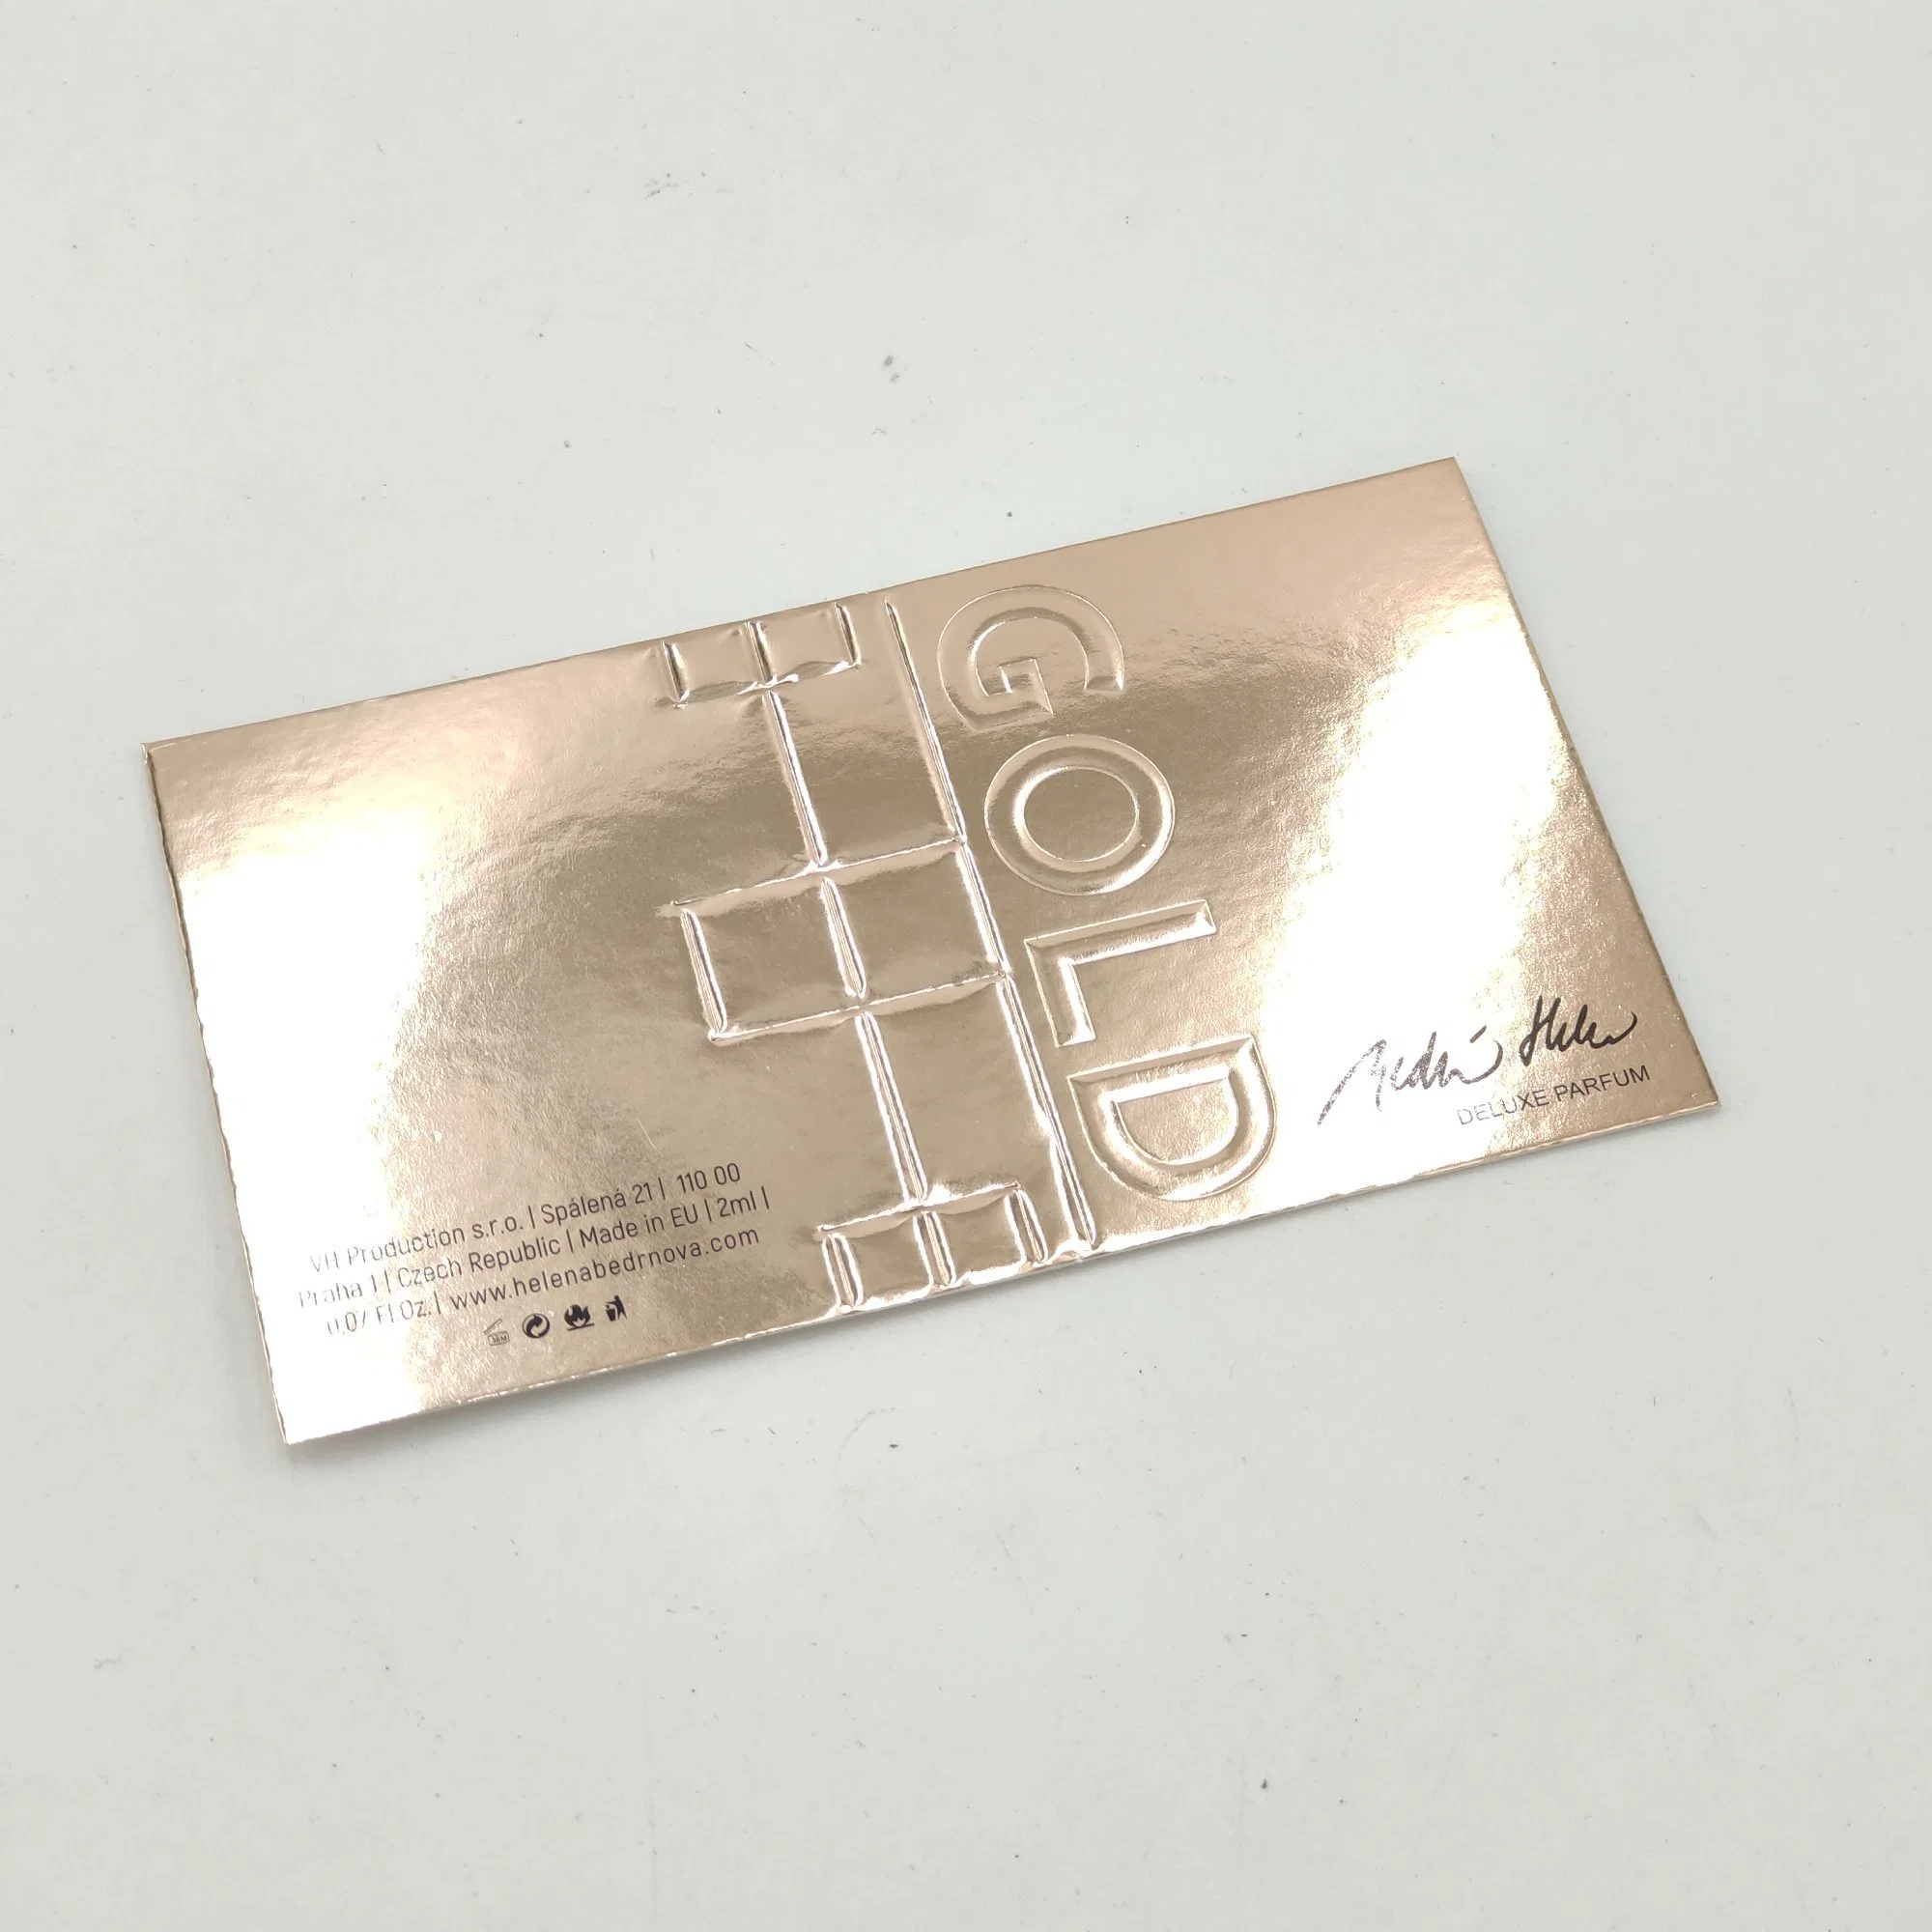 Gold Cardboard Material Card with Printing and 3D Emboss for Perfume Tester